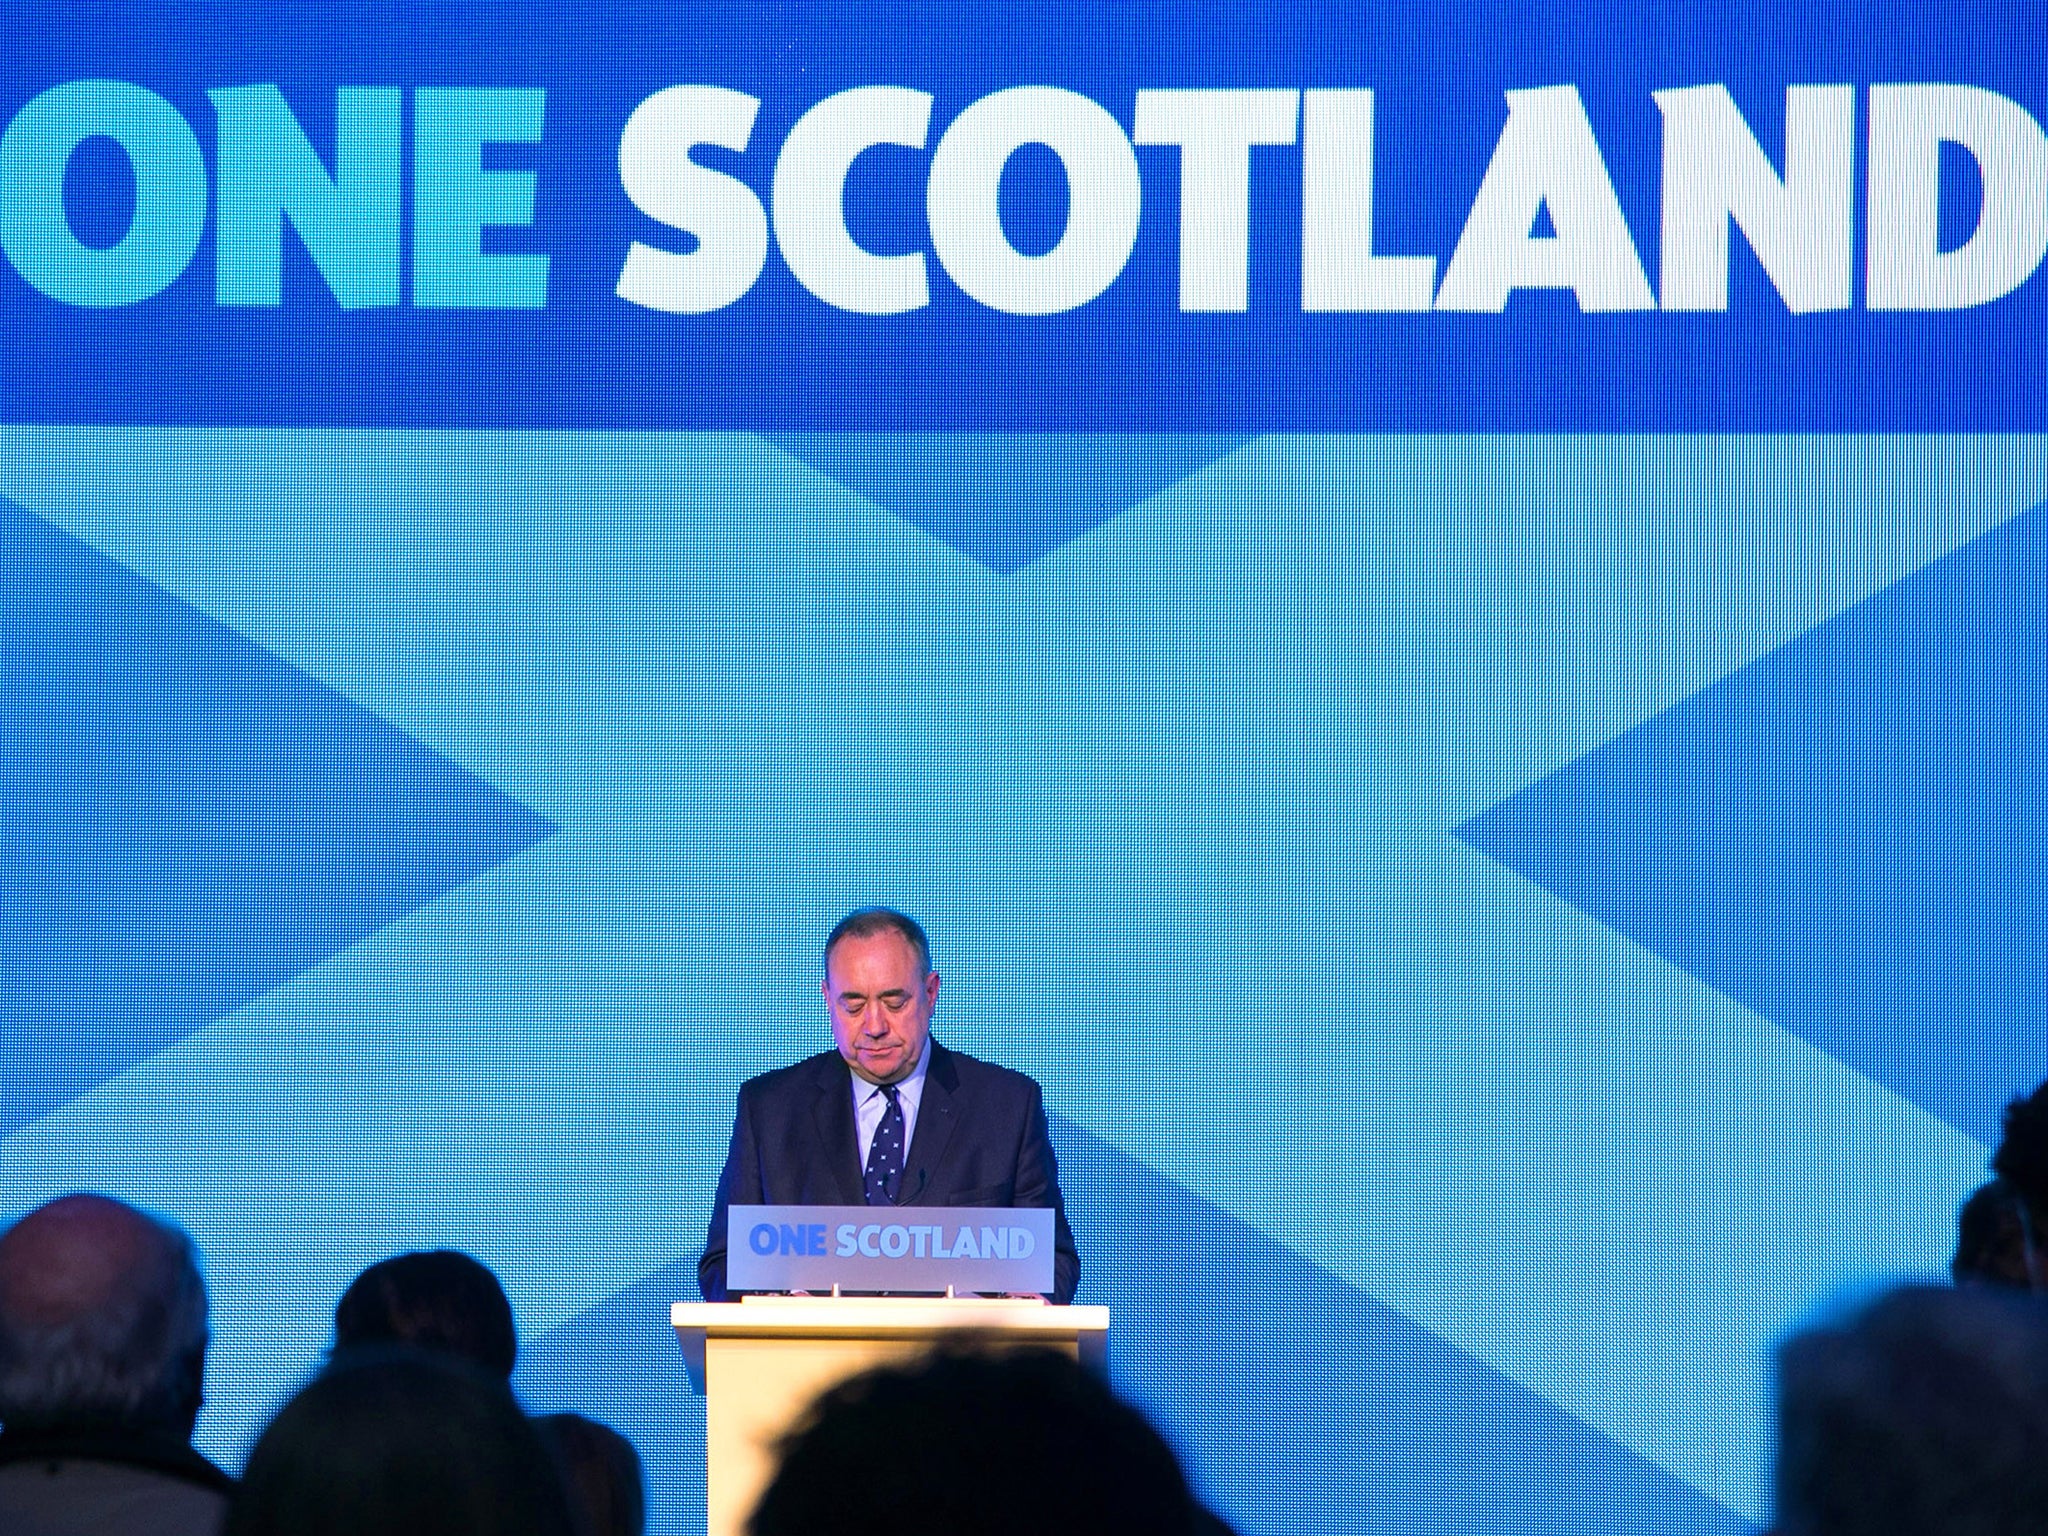 Alex Salmond has stepped down as Scotland's First Minister and the leader of the SNP